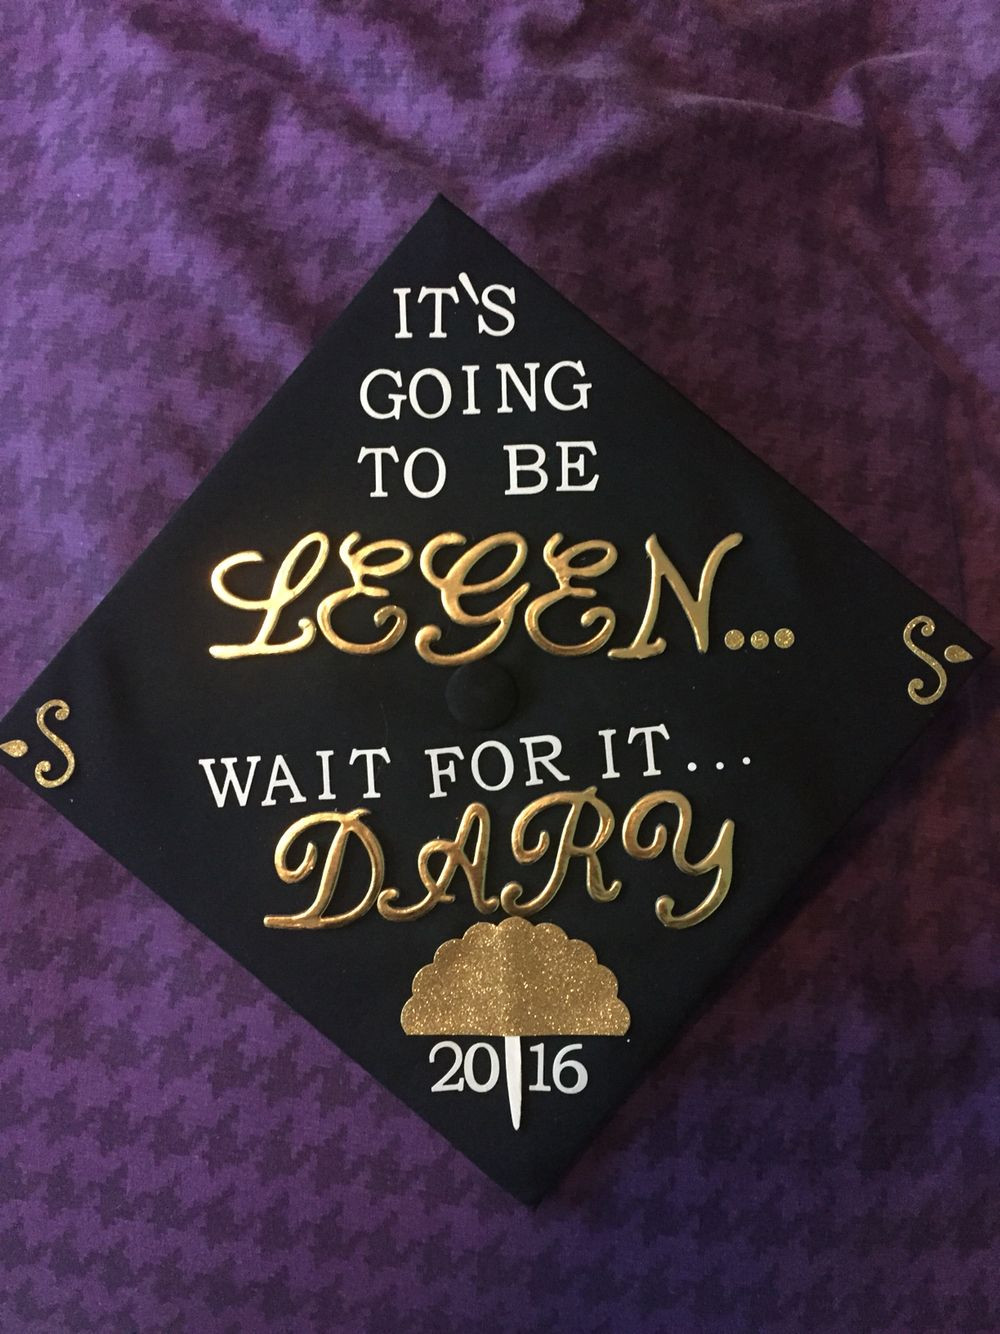 The 20 Best Ideas for Graduation Cap Quotes Home, Family, Style and